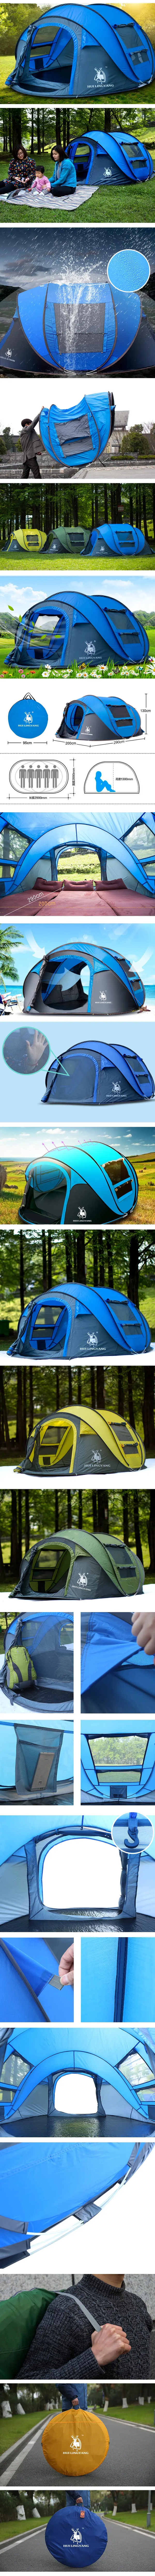 Large Space Pop Up Throw Tent Outdoor 3-4 Person Automatic Tents Waterproof Beach Tents Waterproof Family Camping Hiking Tents